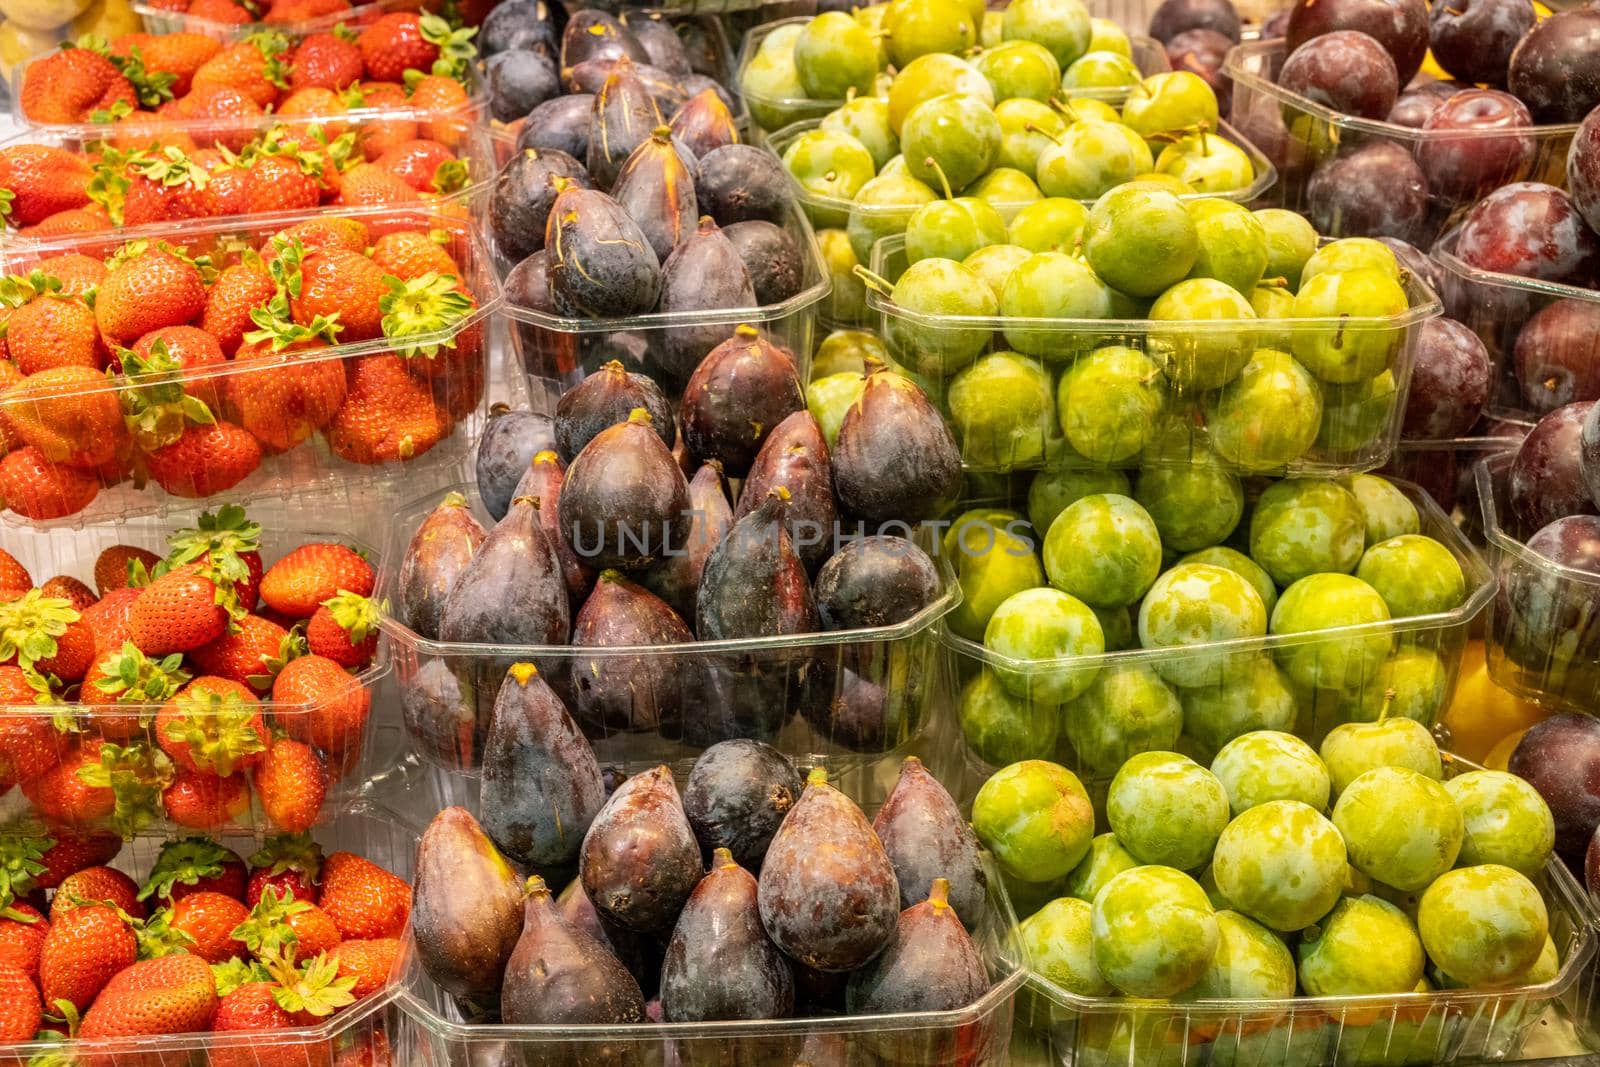 Plums, strawberries and figs for sale at a market